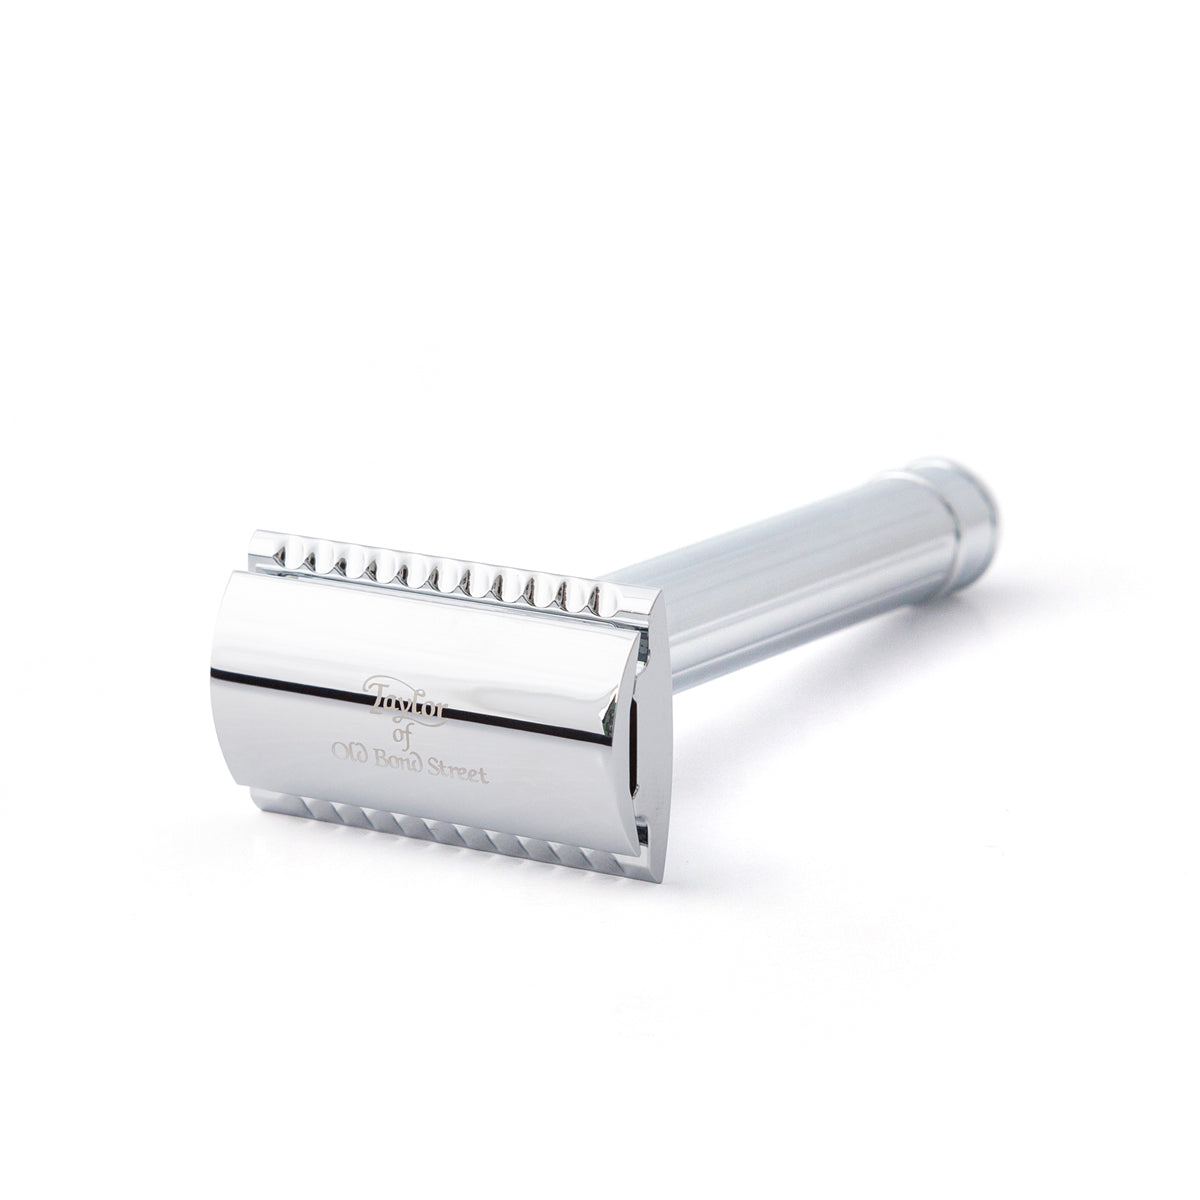 Taylor of Old Bond Street No. 89 Safety Razor with Chrome Handle